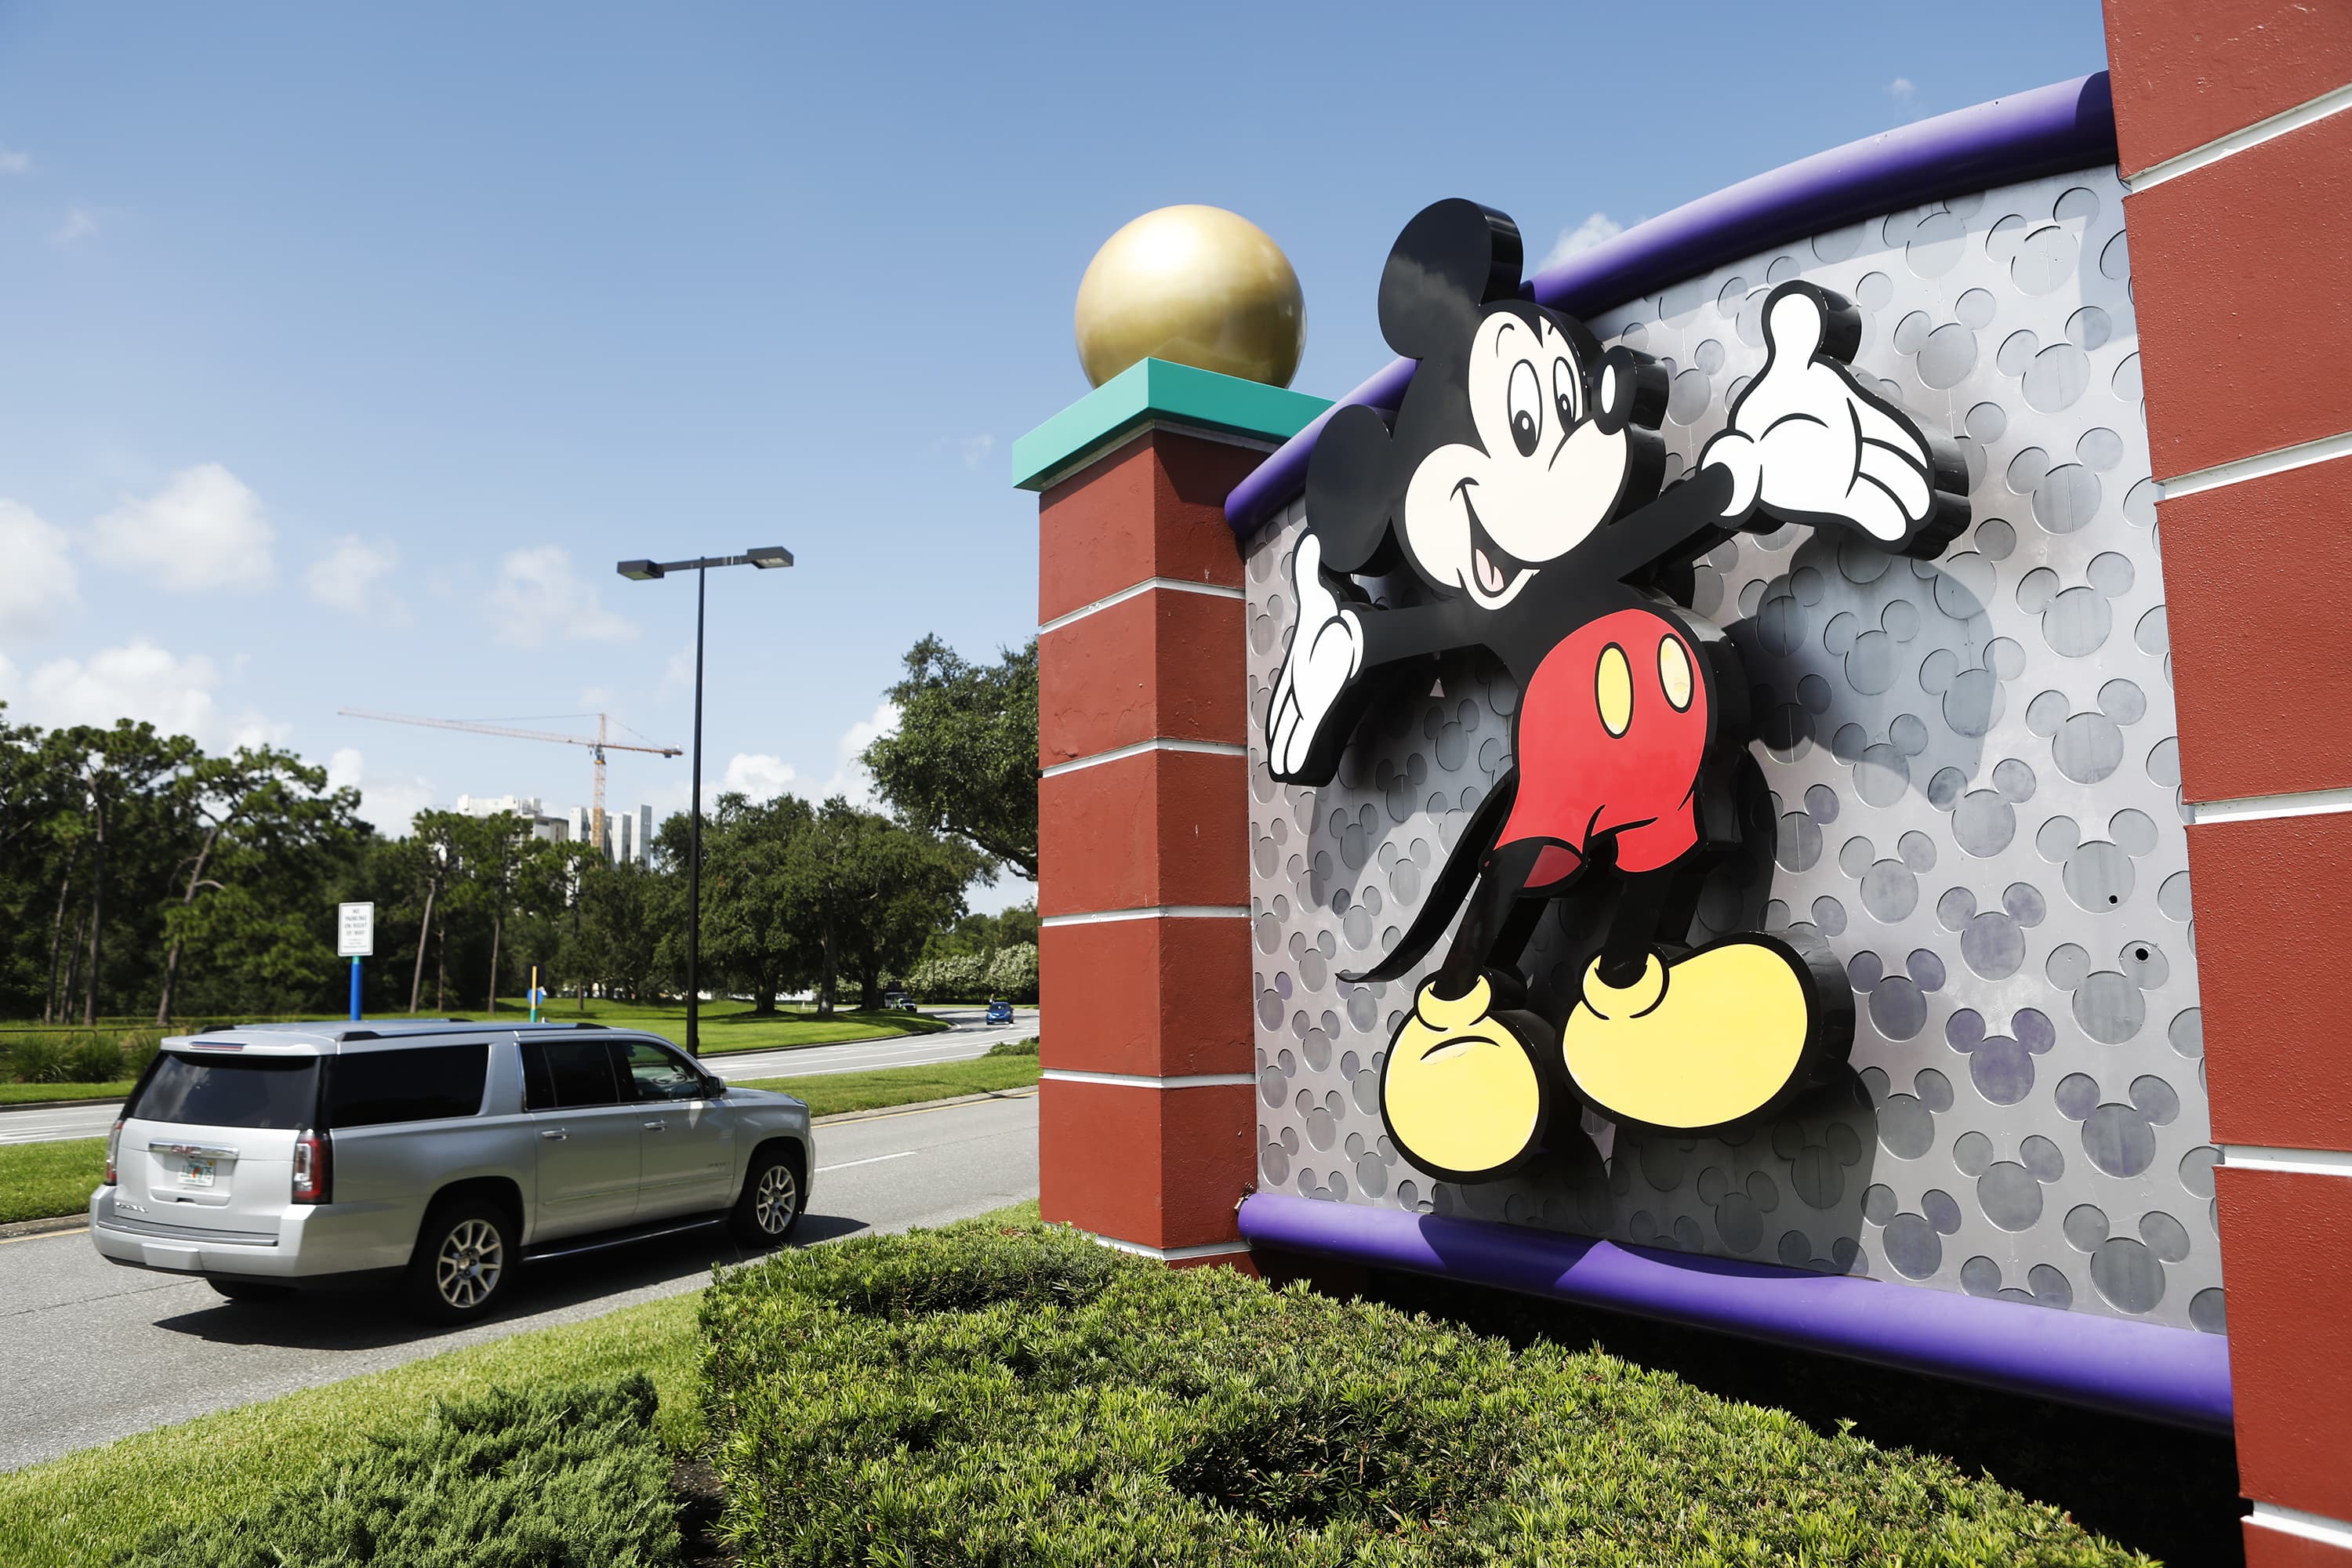 Disney CEO says company opposes ‘Don’t Say Gay’ bill in Florida, will meet with ..